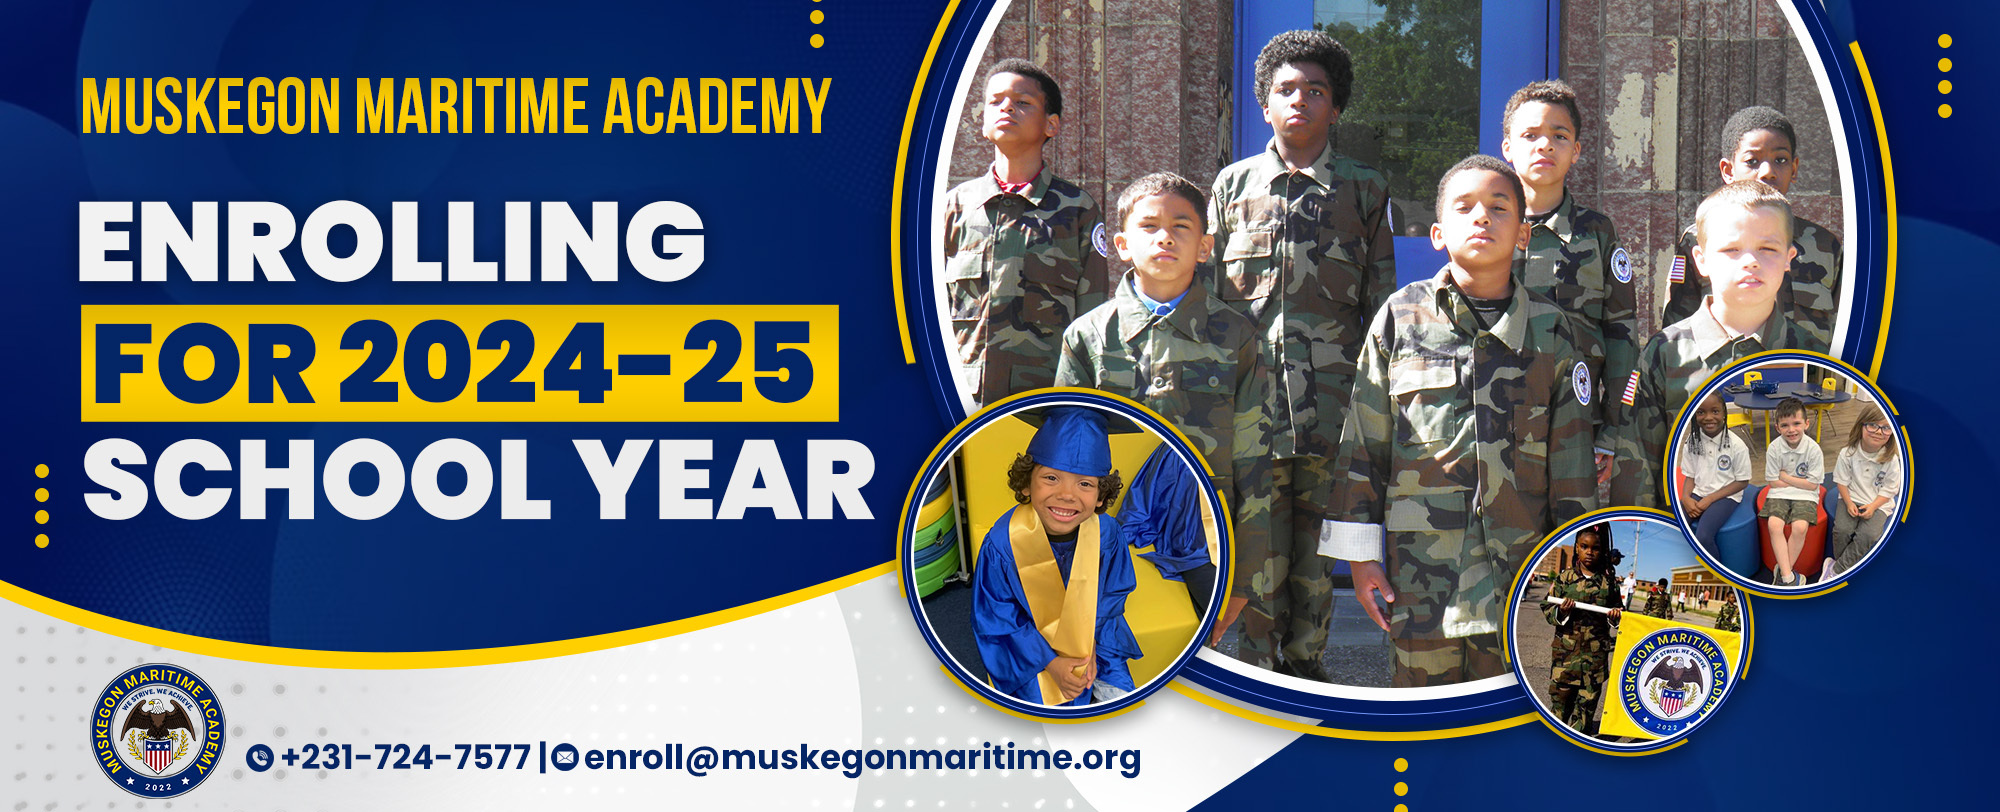 Now enrolling for 2024-25 school year. cal 231-724-7577 or email: enroll@muskegonmaritime.org